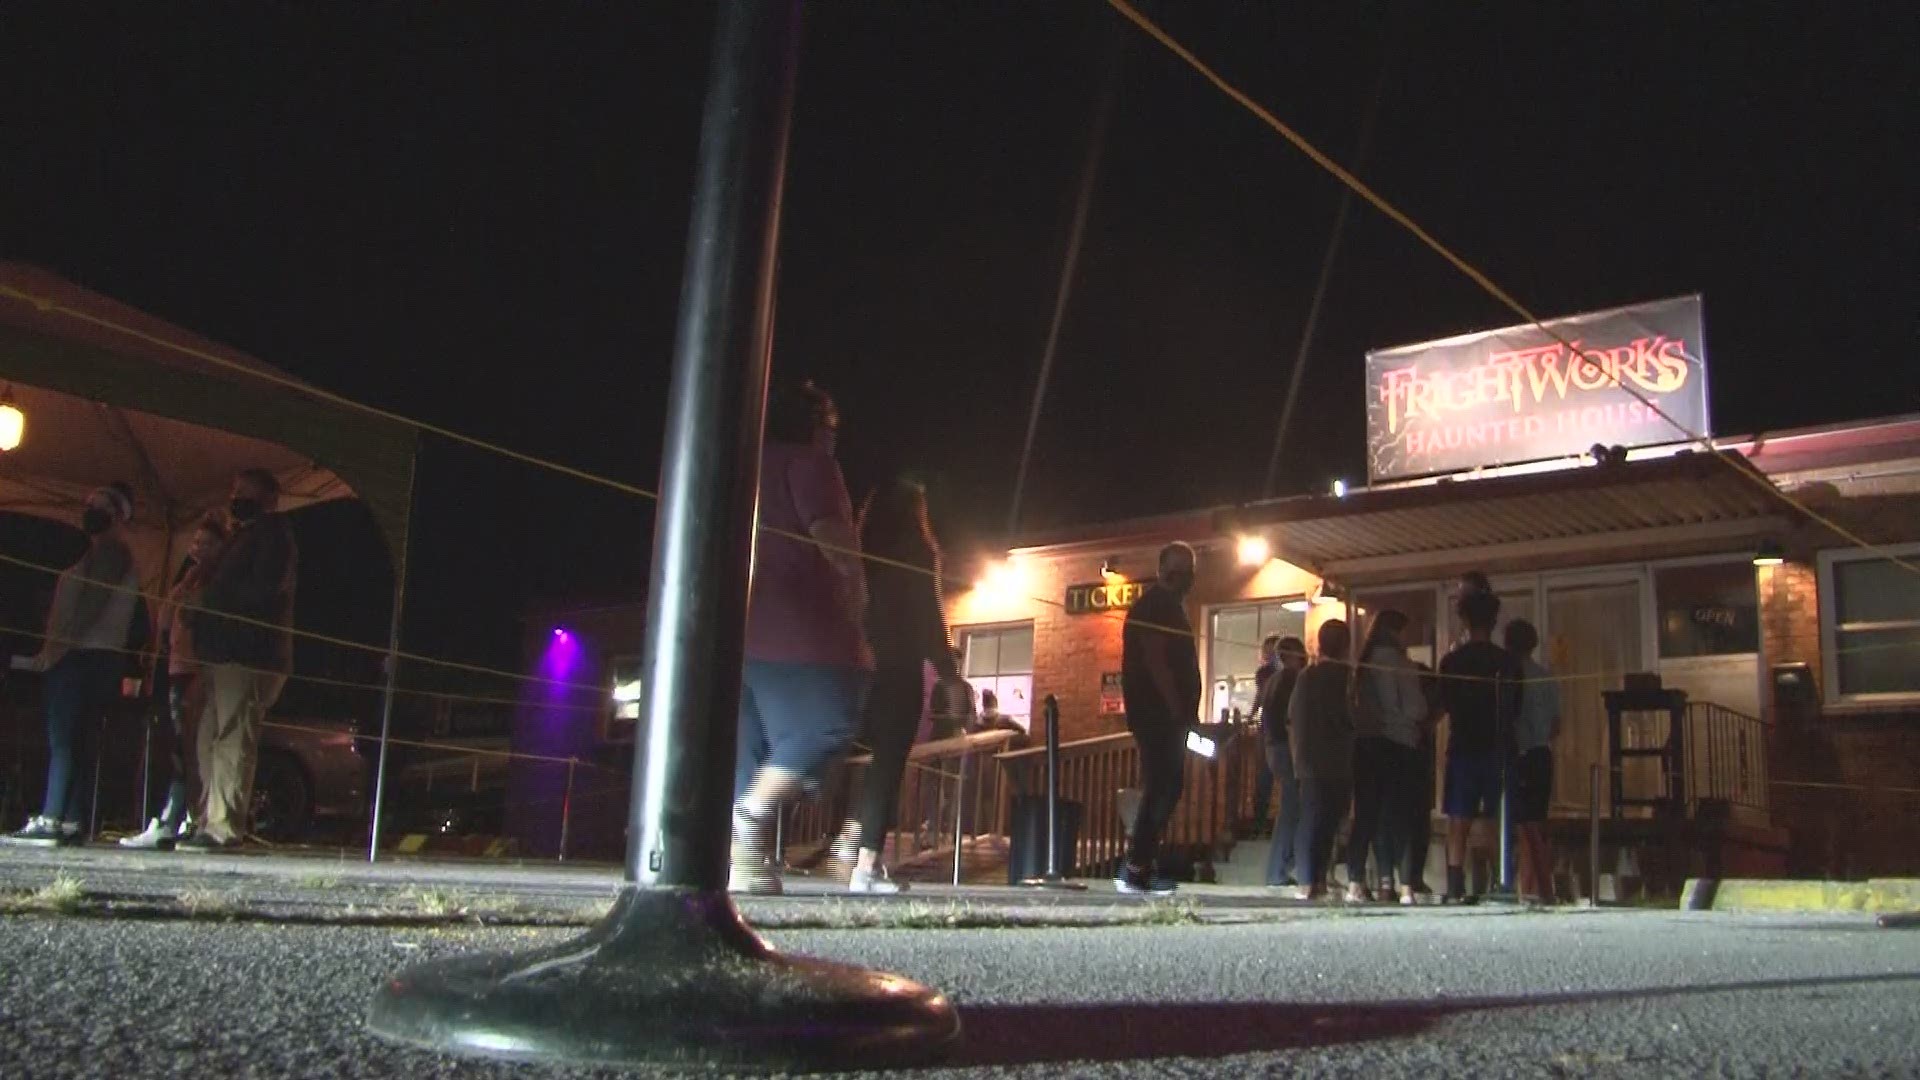 East Tennessee haunted houses are changing up safety guidelines, requiring people to wear masks and cutting down line wait time.